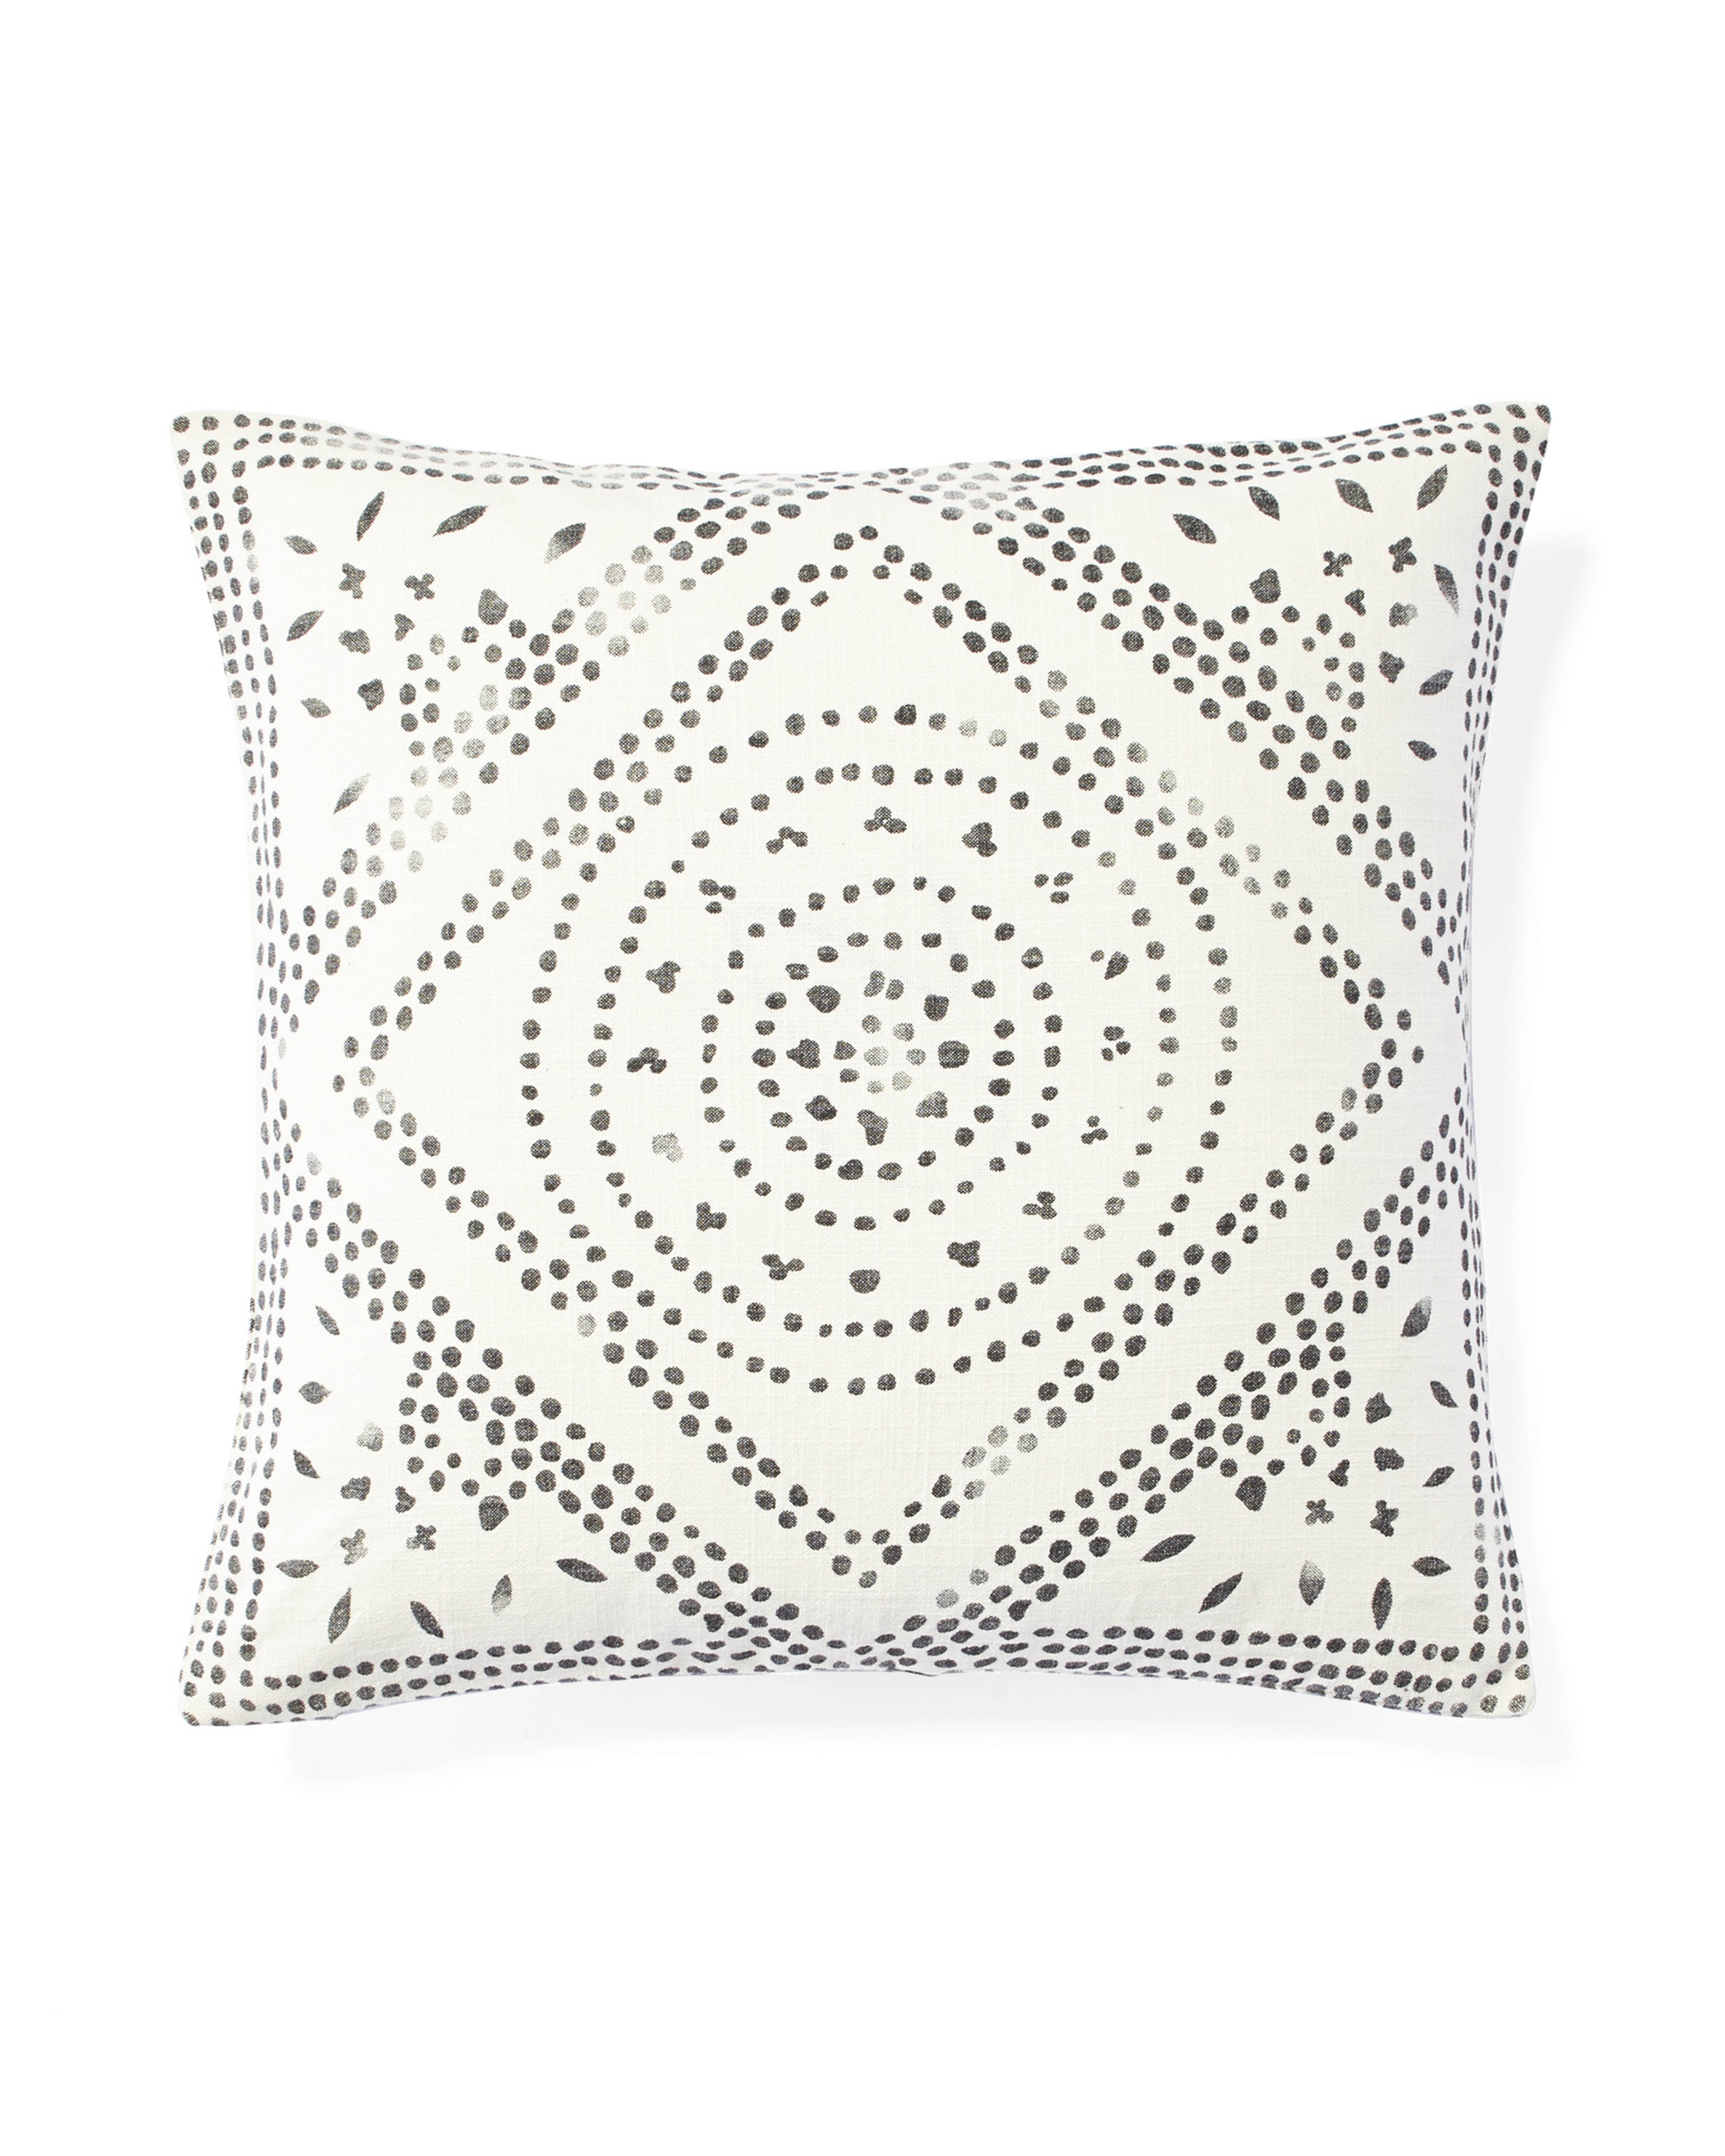 Camille Diamond Medallion Pillow Cover - Ivory - 20"SQ - Insert sold separately - Serena and Lily